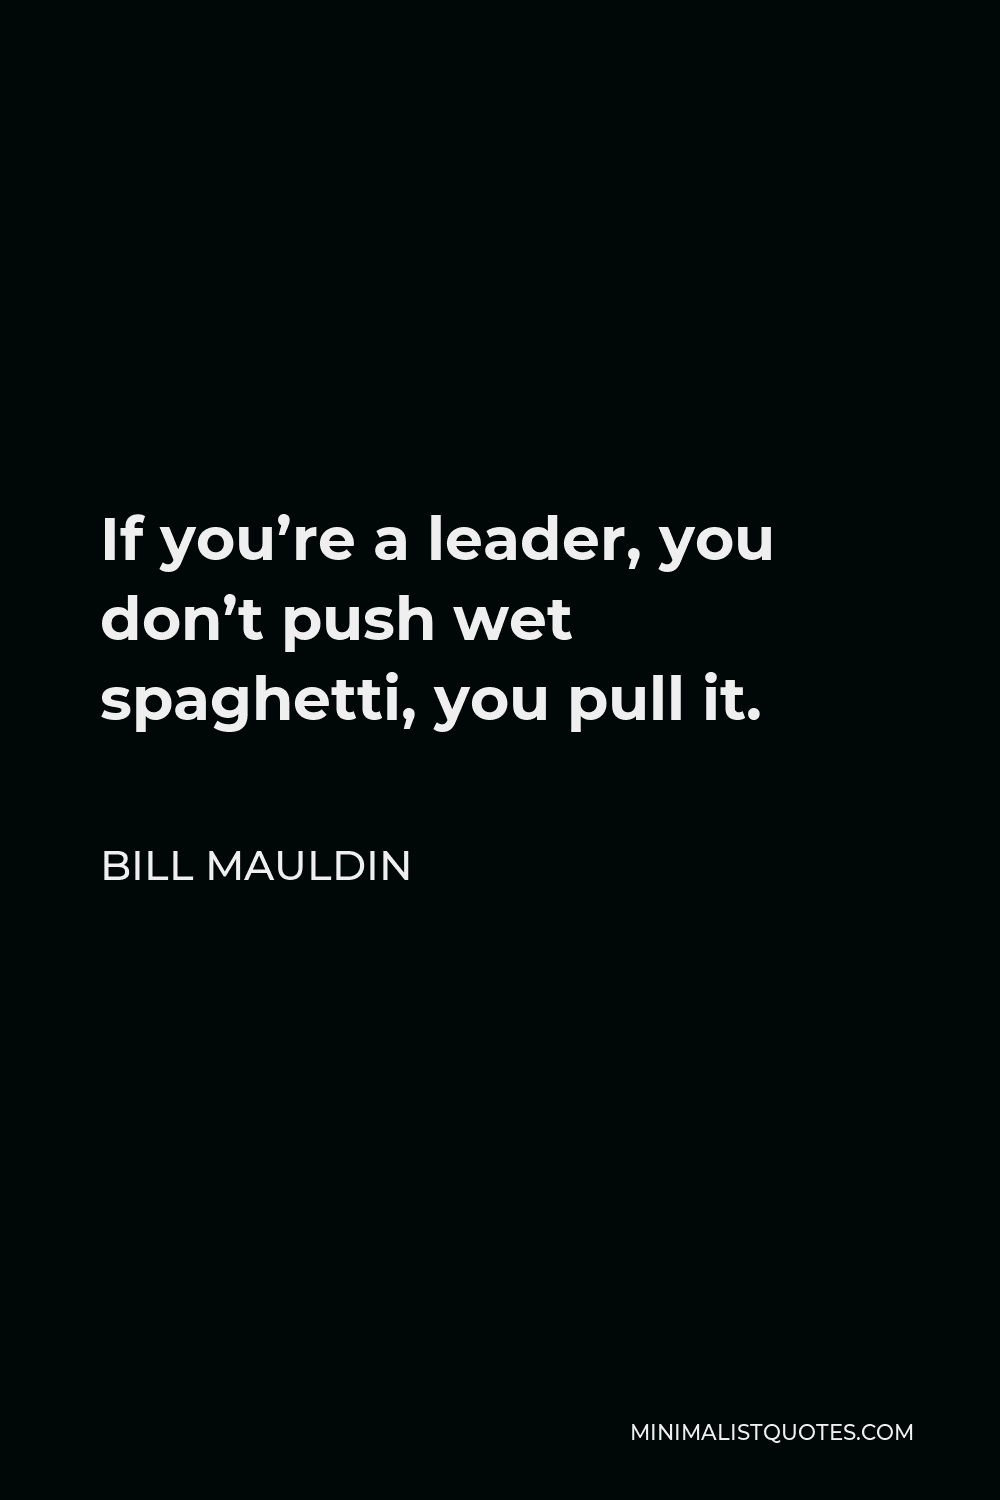 Bill Mauldin Quote - If you’re a leader, you don’t push wet spaghetti, you pull it.